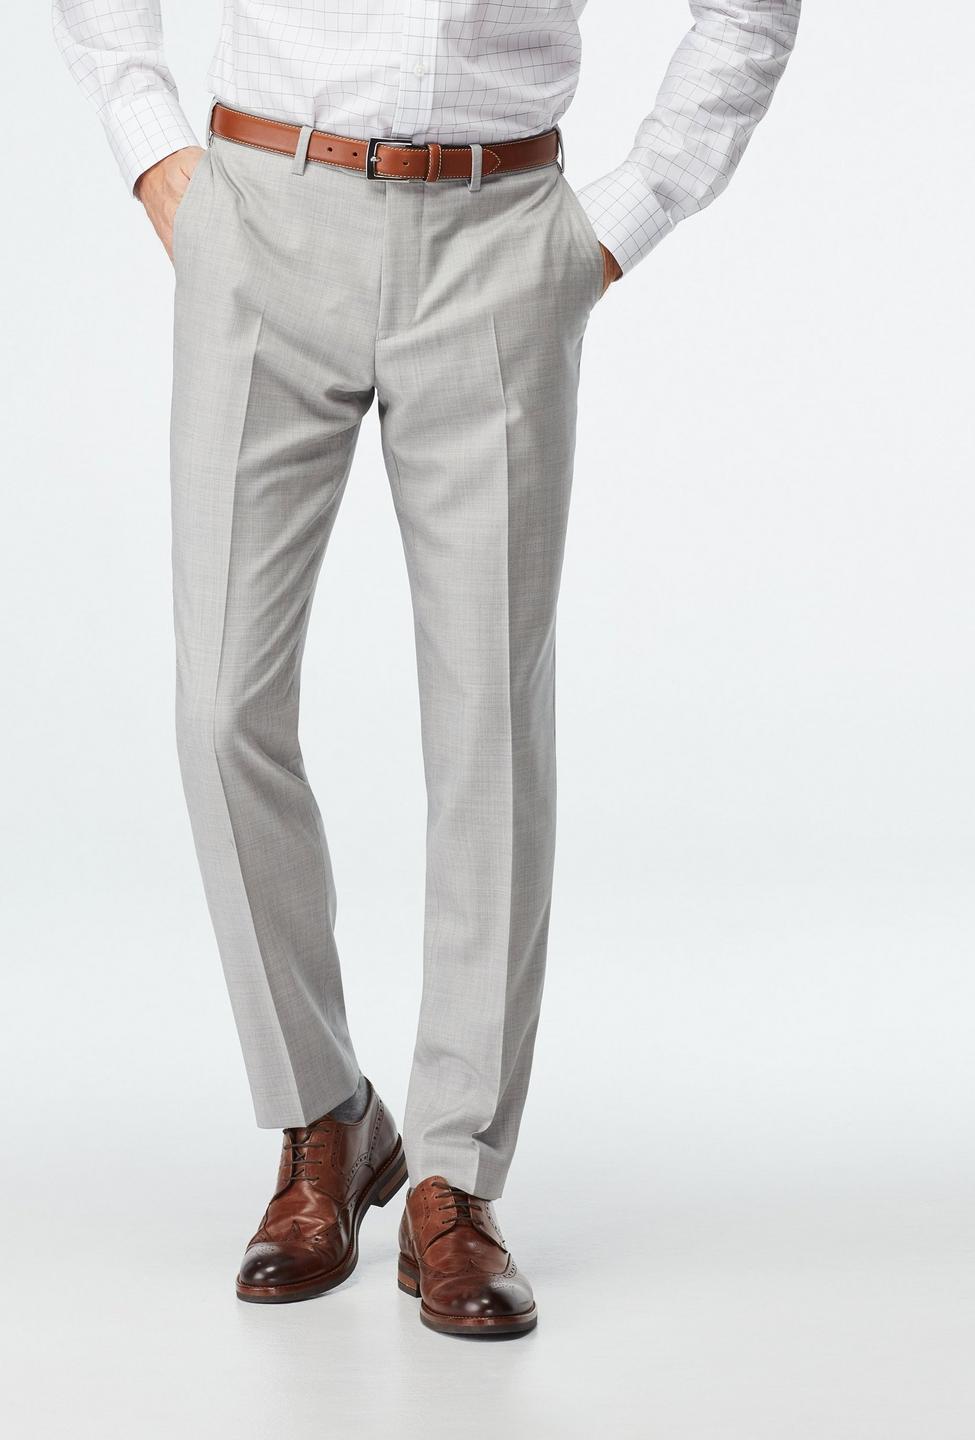 Gray pants - Harrogate Solid Design from Luxury Indochino Collection